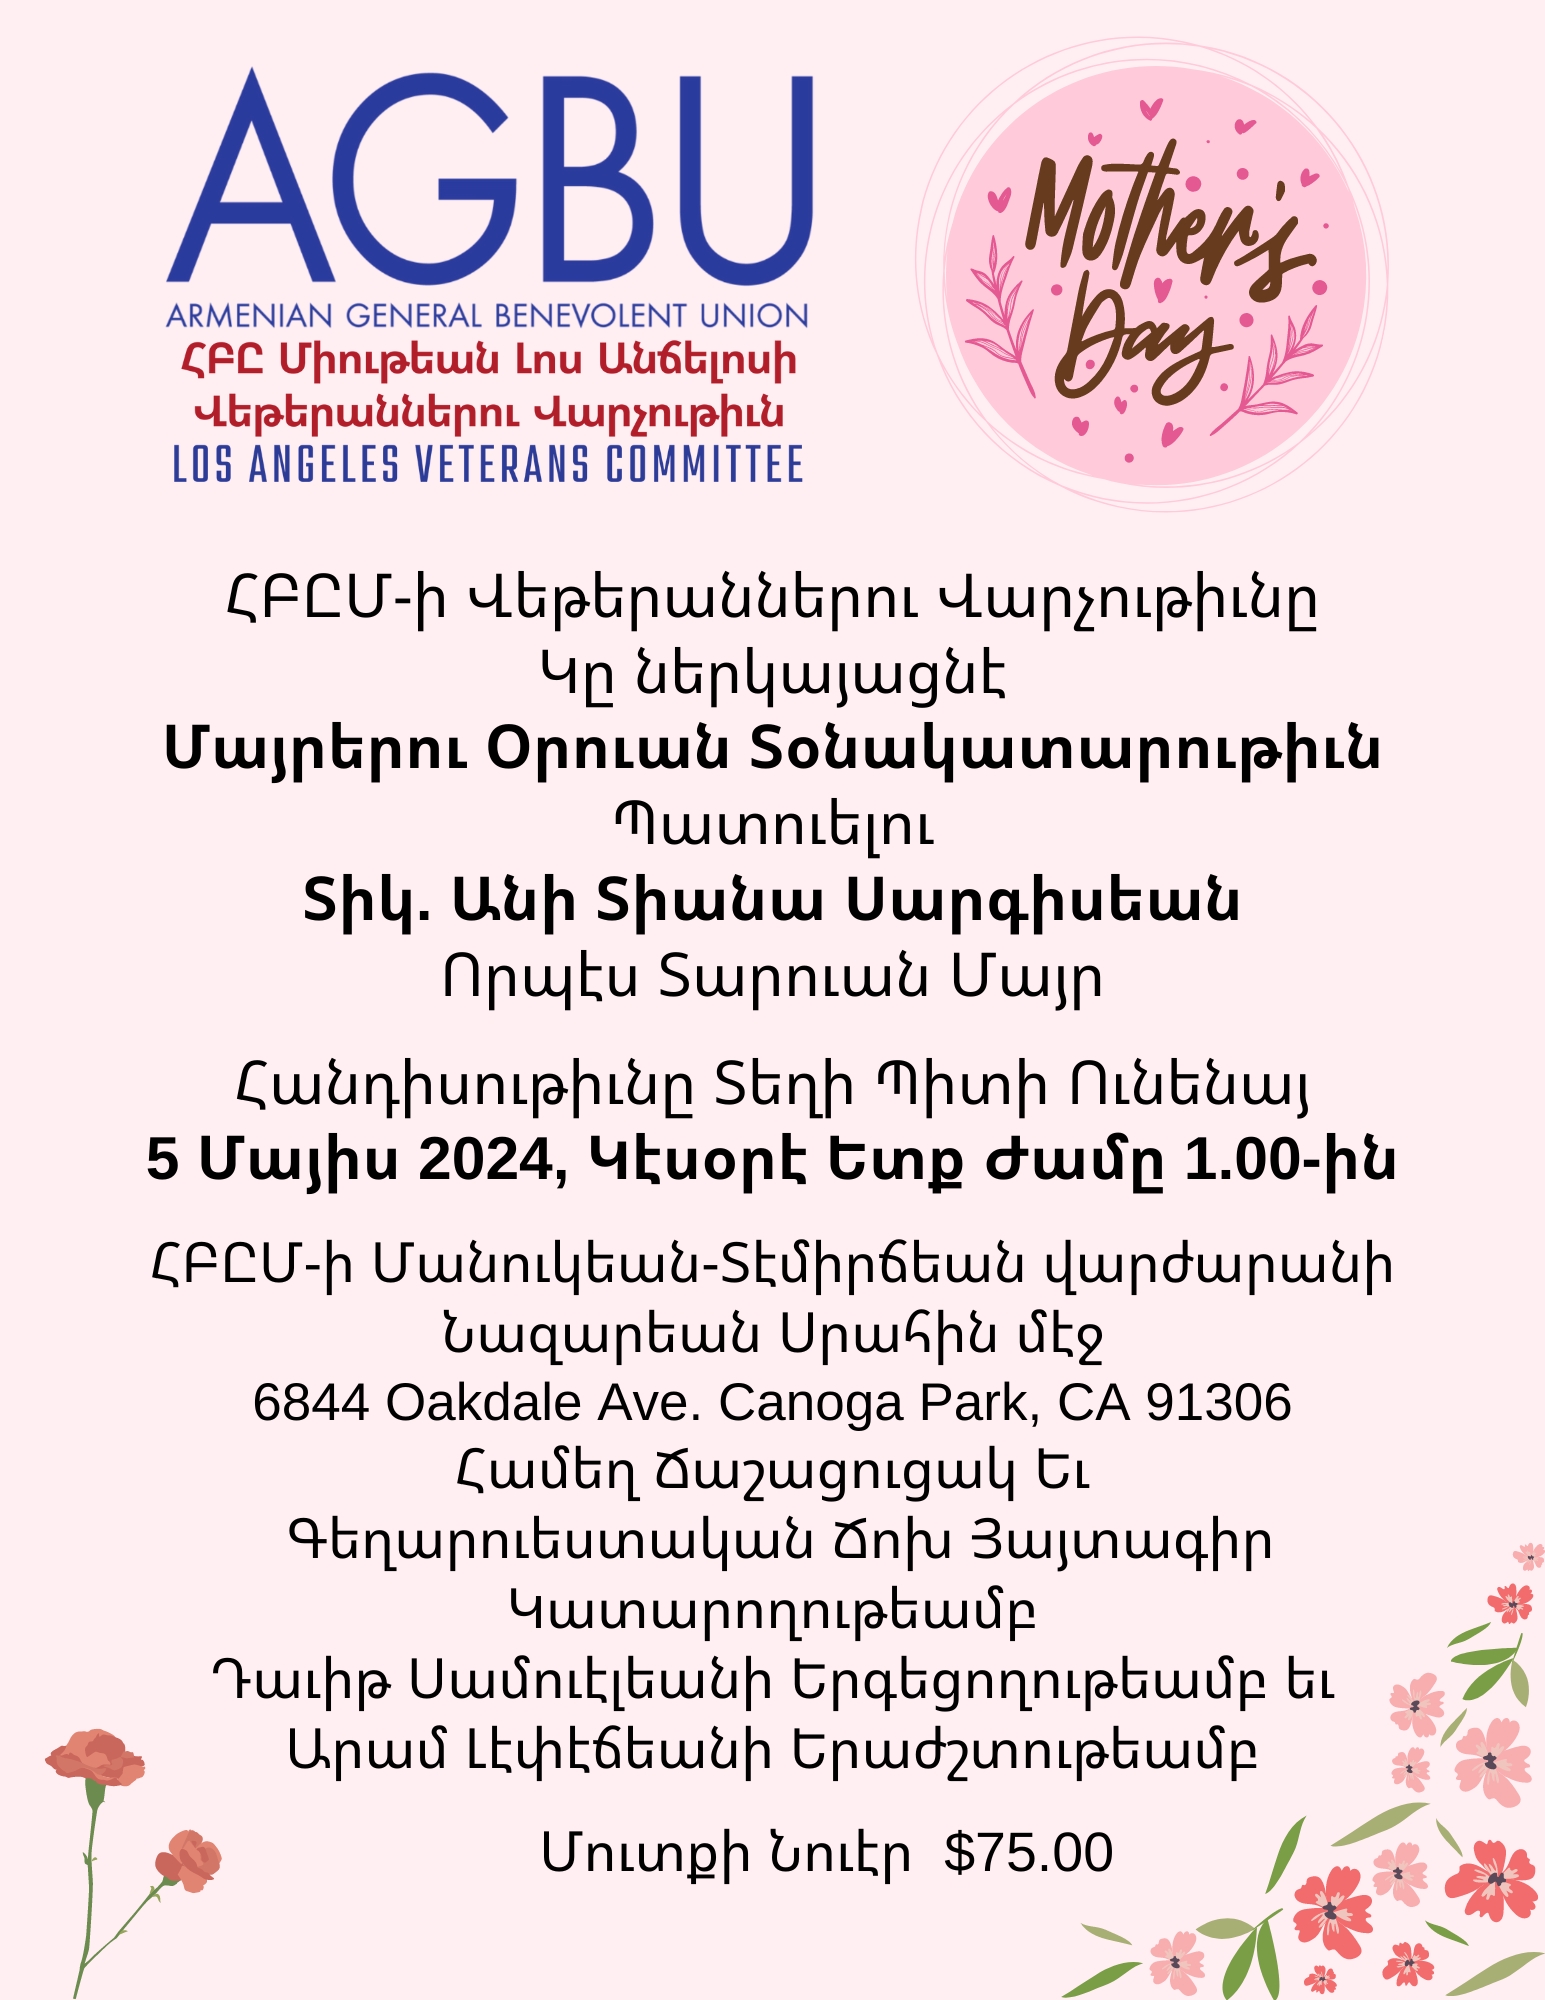 Mother’s Day event hosted by AGBU LA Veterans Committee